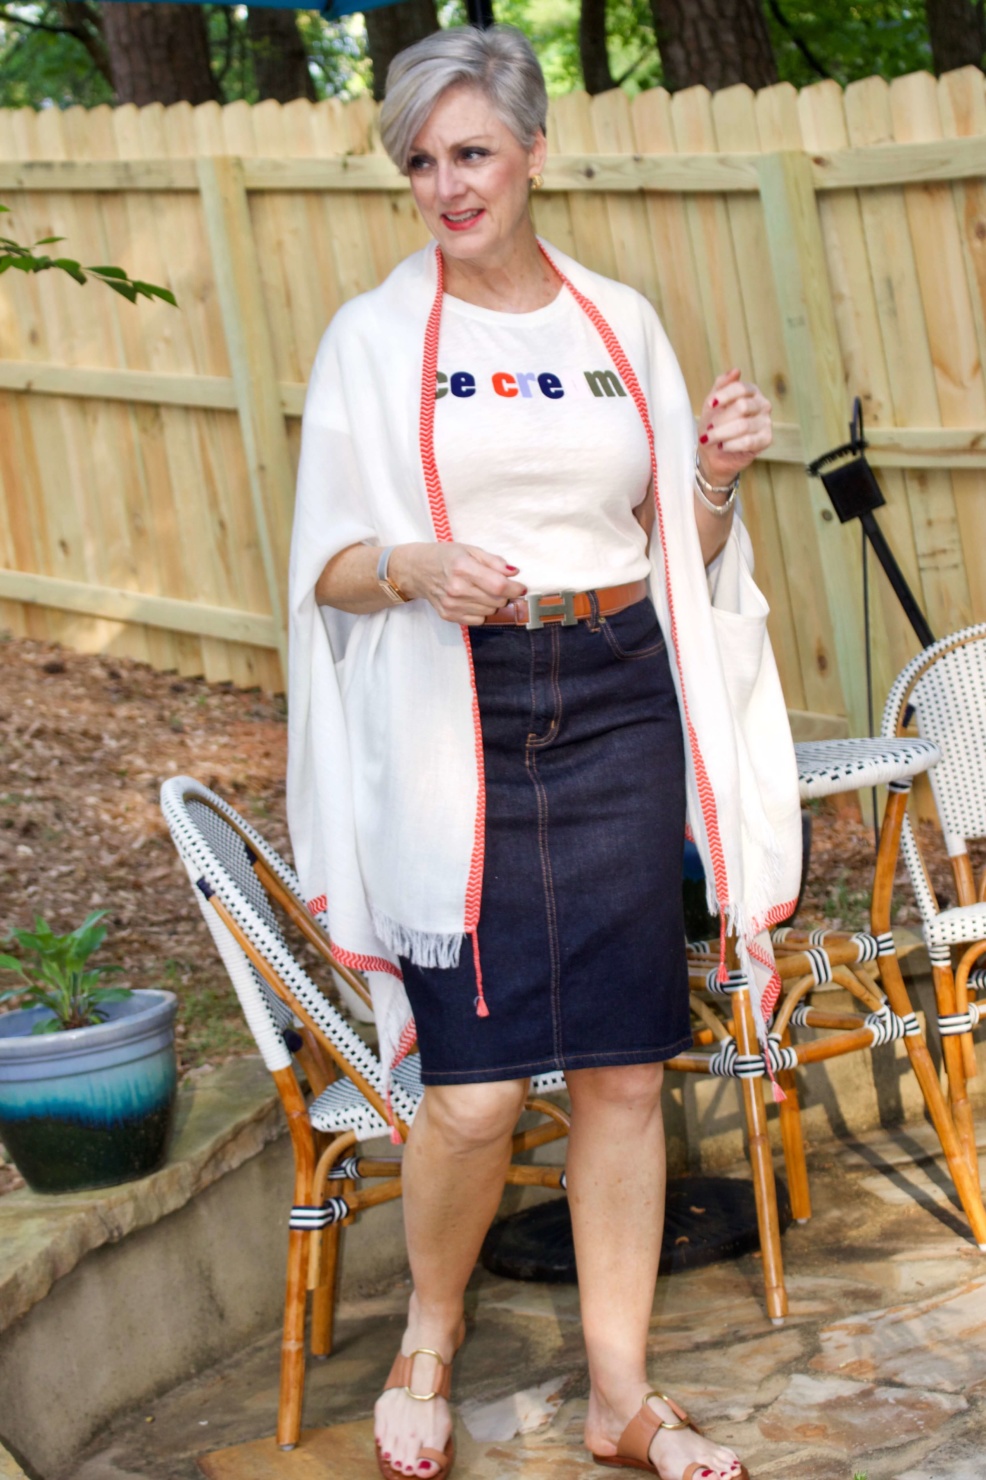 beth from Style at a Certain Age wears a J.Crew graphic tee, jean skirt, lightweight cape scarf, and Tory Burch sandals